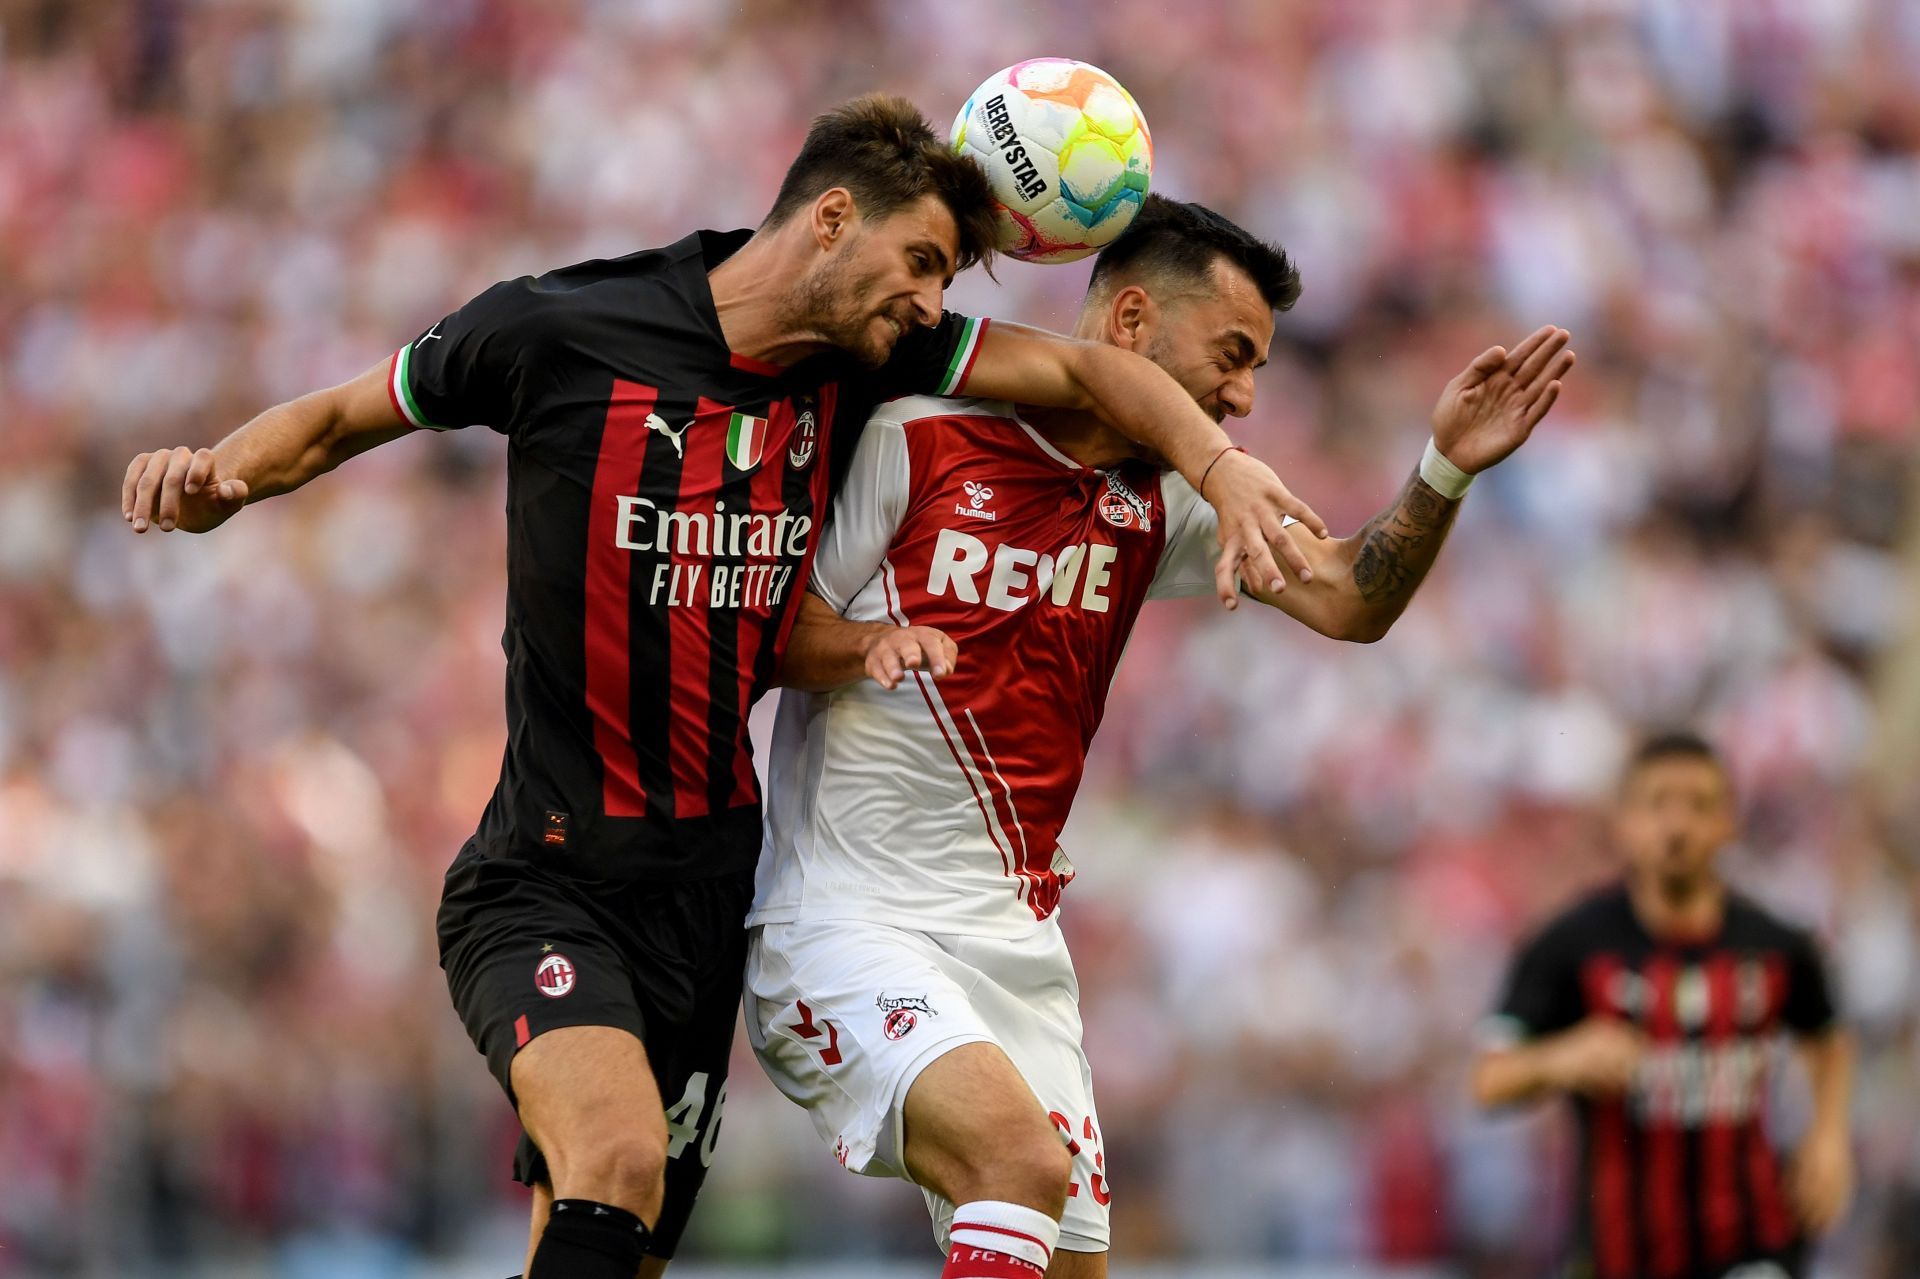 AC Milan conclude their pre-season with a game against Vicenza on Saturday